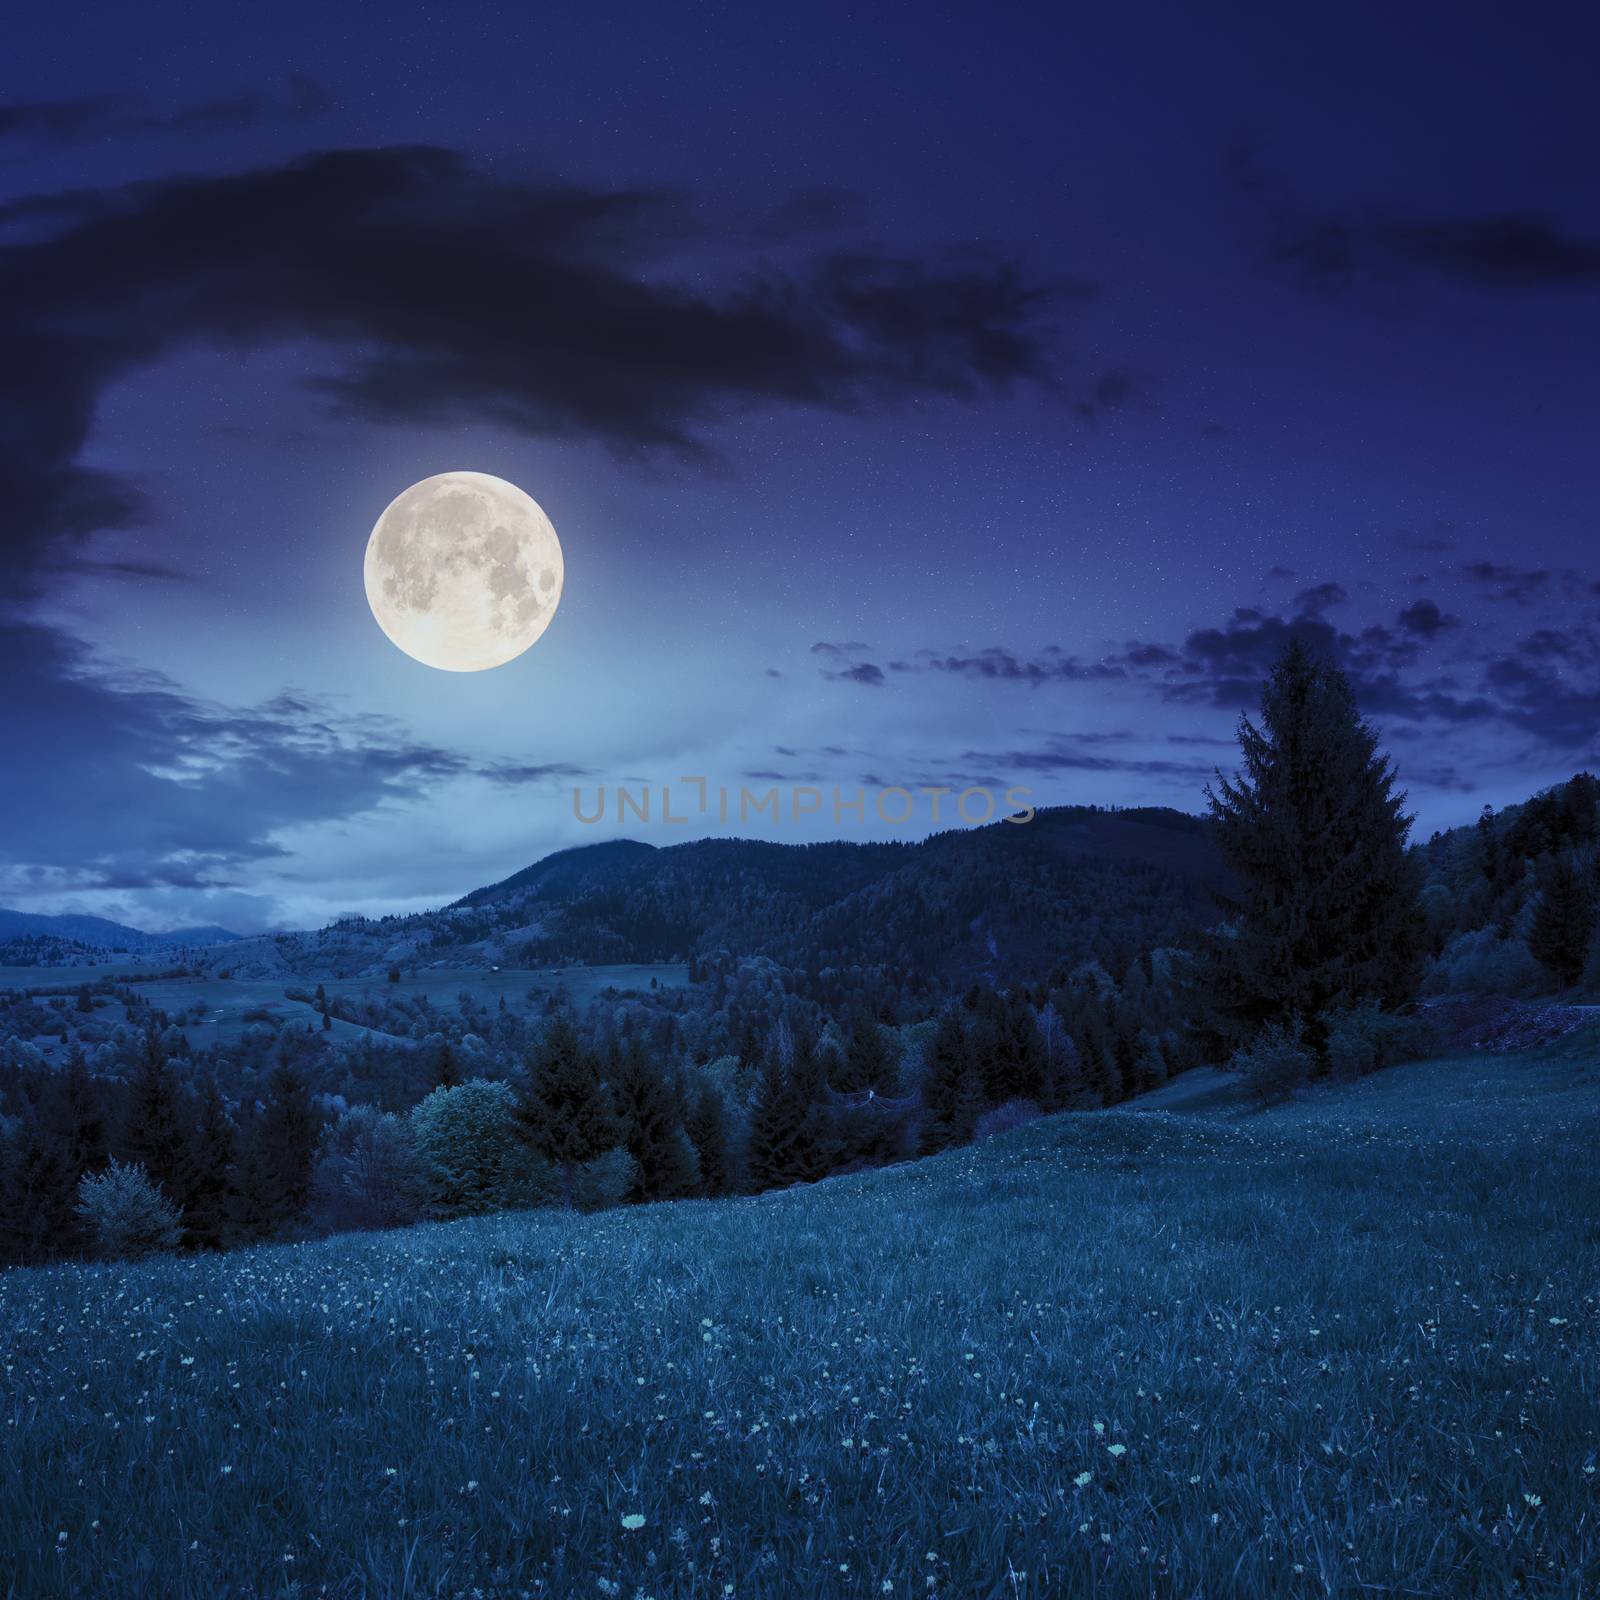 meadow slope of mountain range with coniferous forest and village at night in full moon light